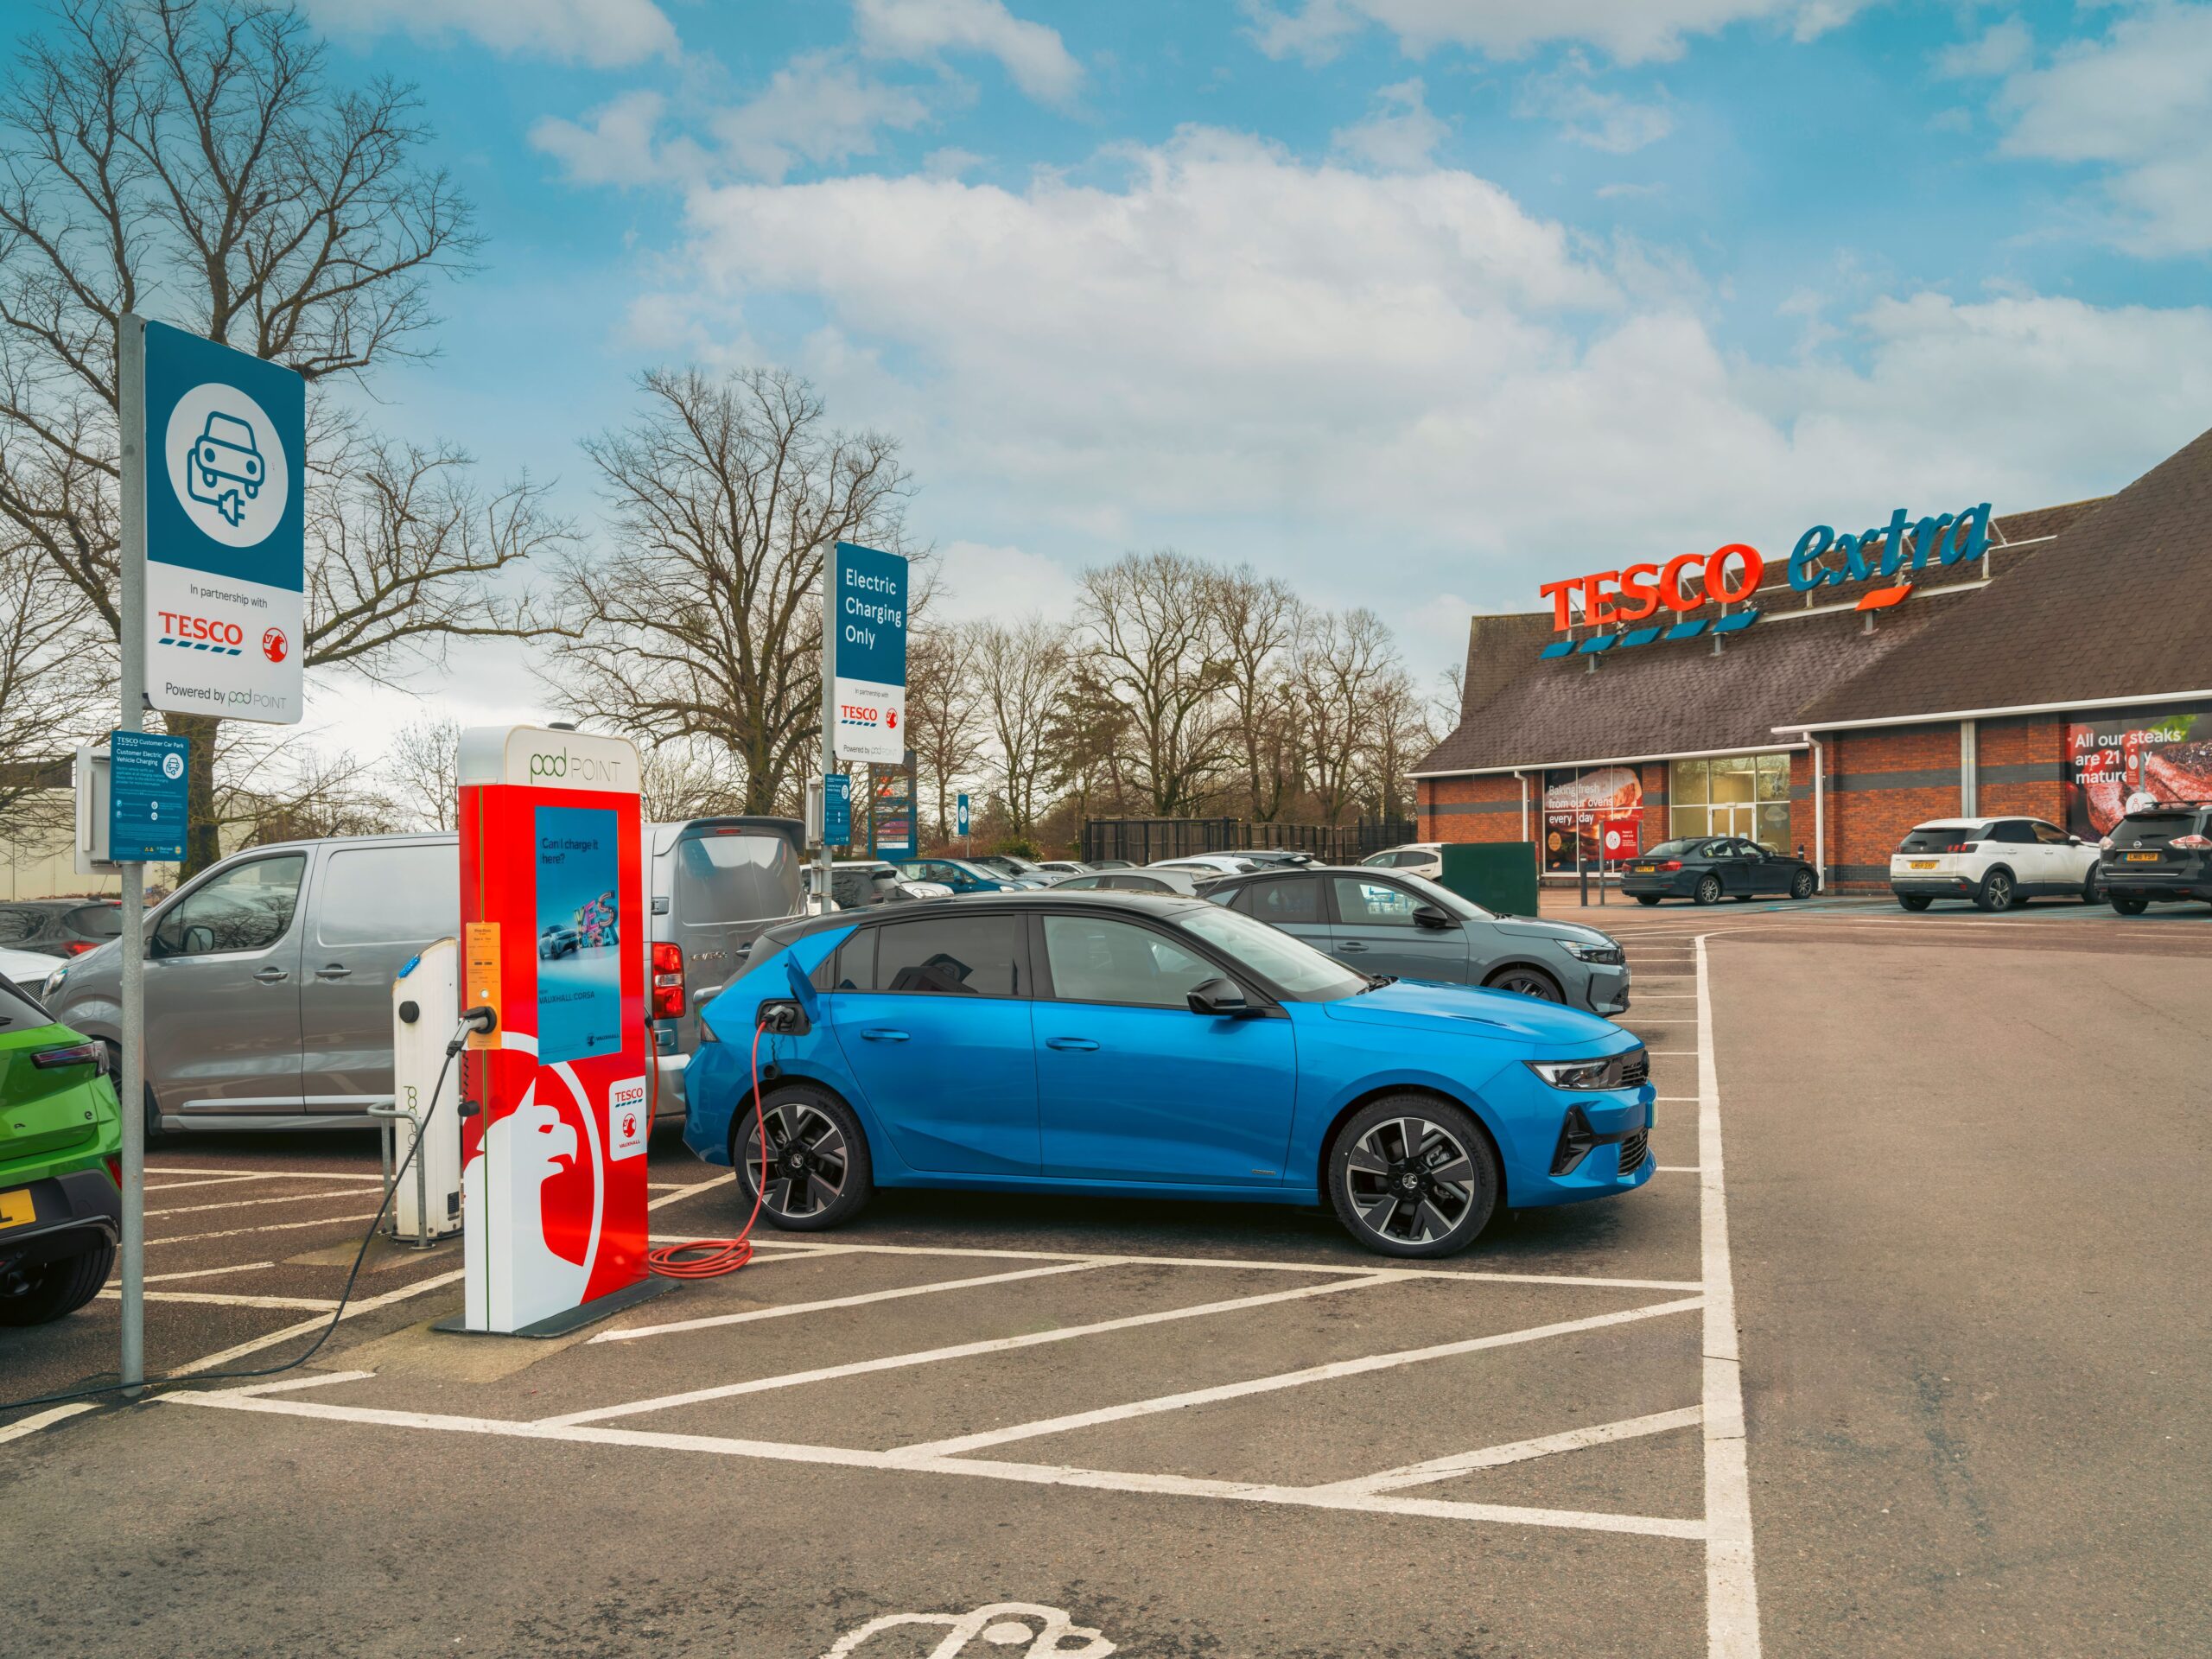 (02) VAUXHALL OFFERS NEW CUSTOMERS ONE YEARS FREE EV CHARGING CREDIT IN PARTNERSHIP WITH TESCO - Copy